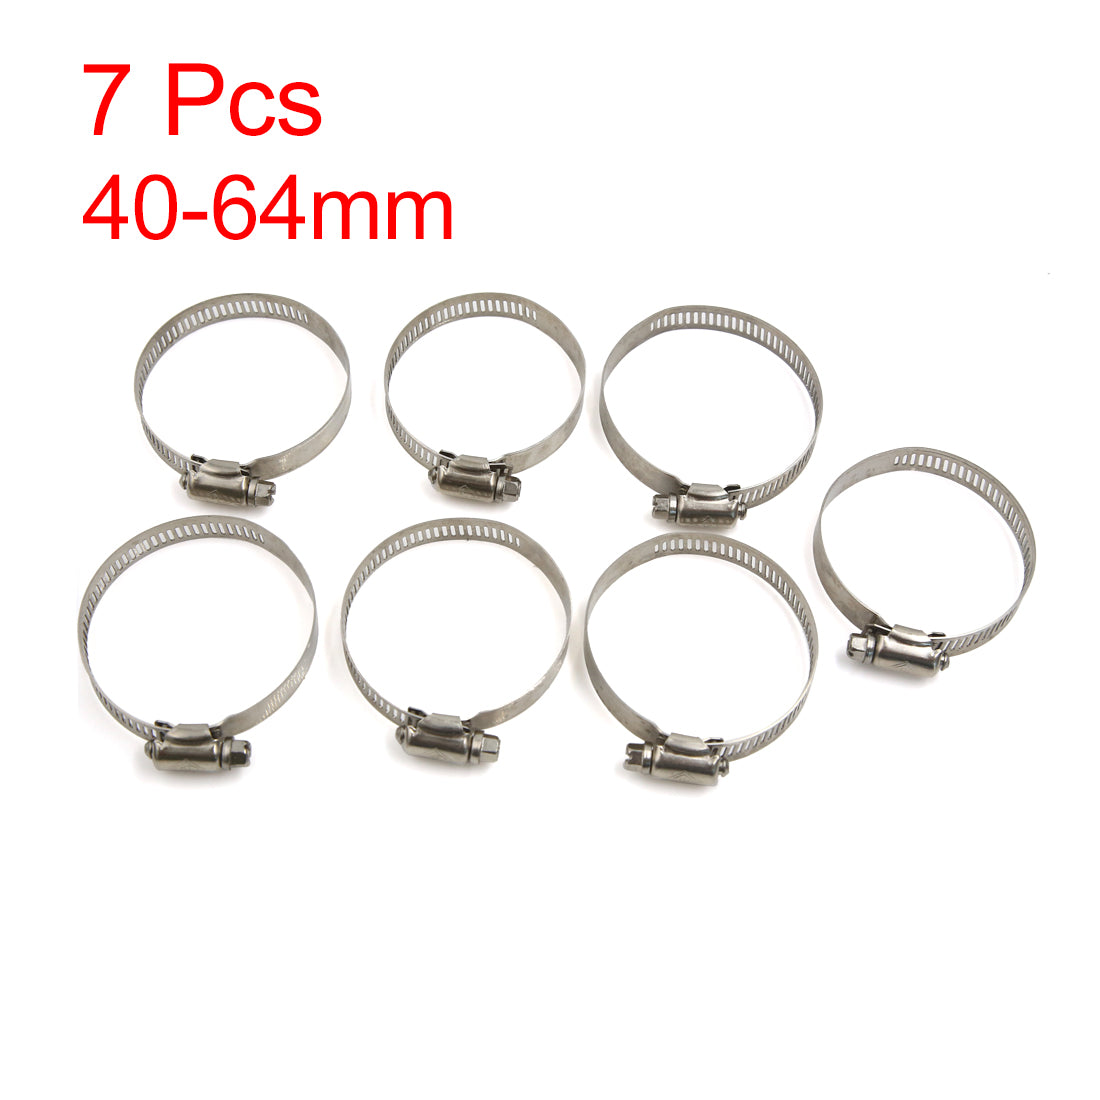 uxcell Uxcell 7Pcs Metal Adjustable Hose Clip Clamps Pipe Tube Tight Click 40-64mm for Car